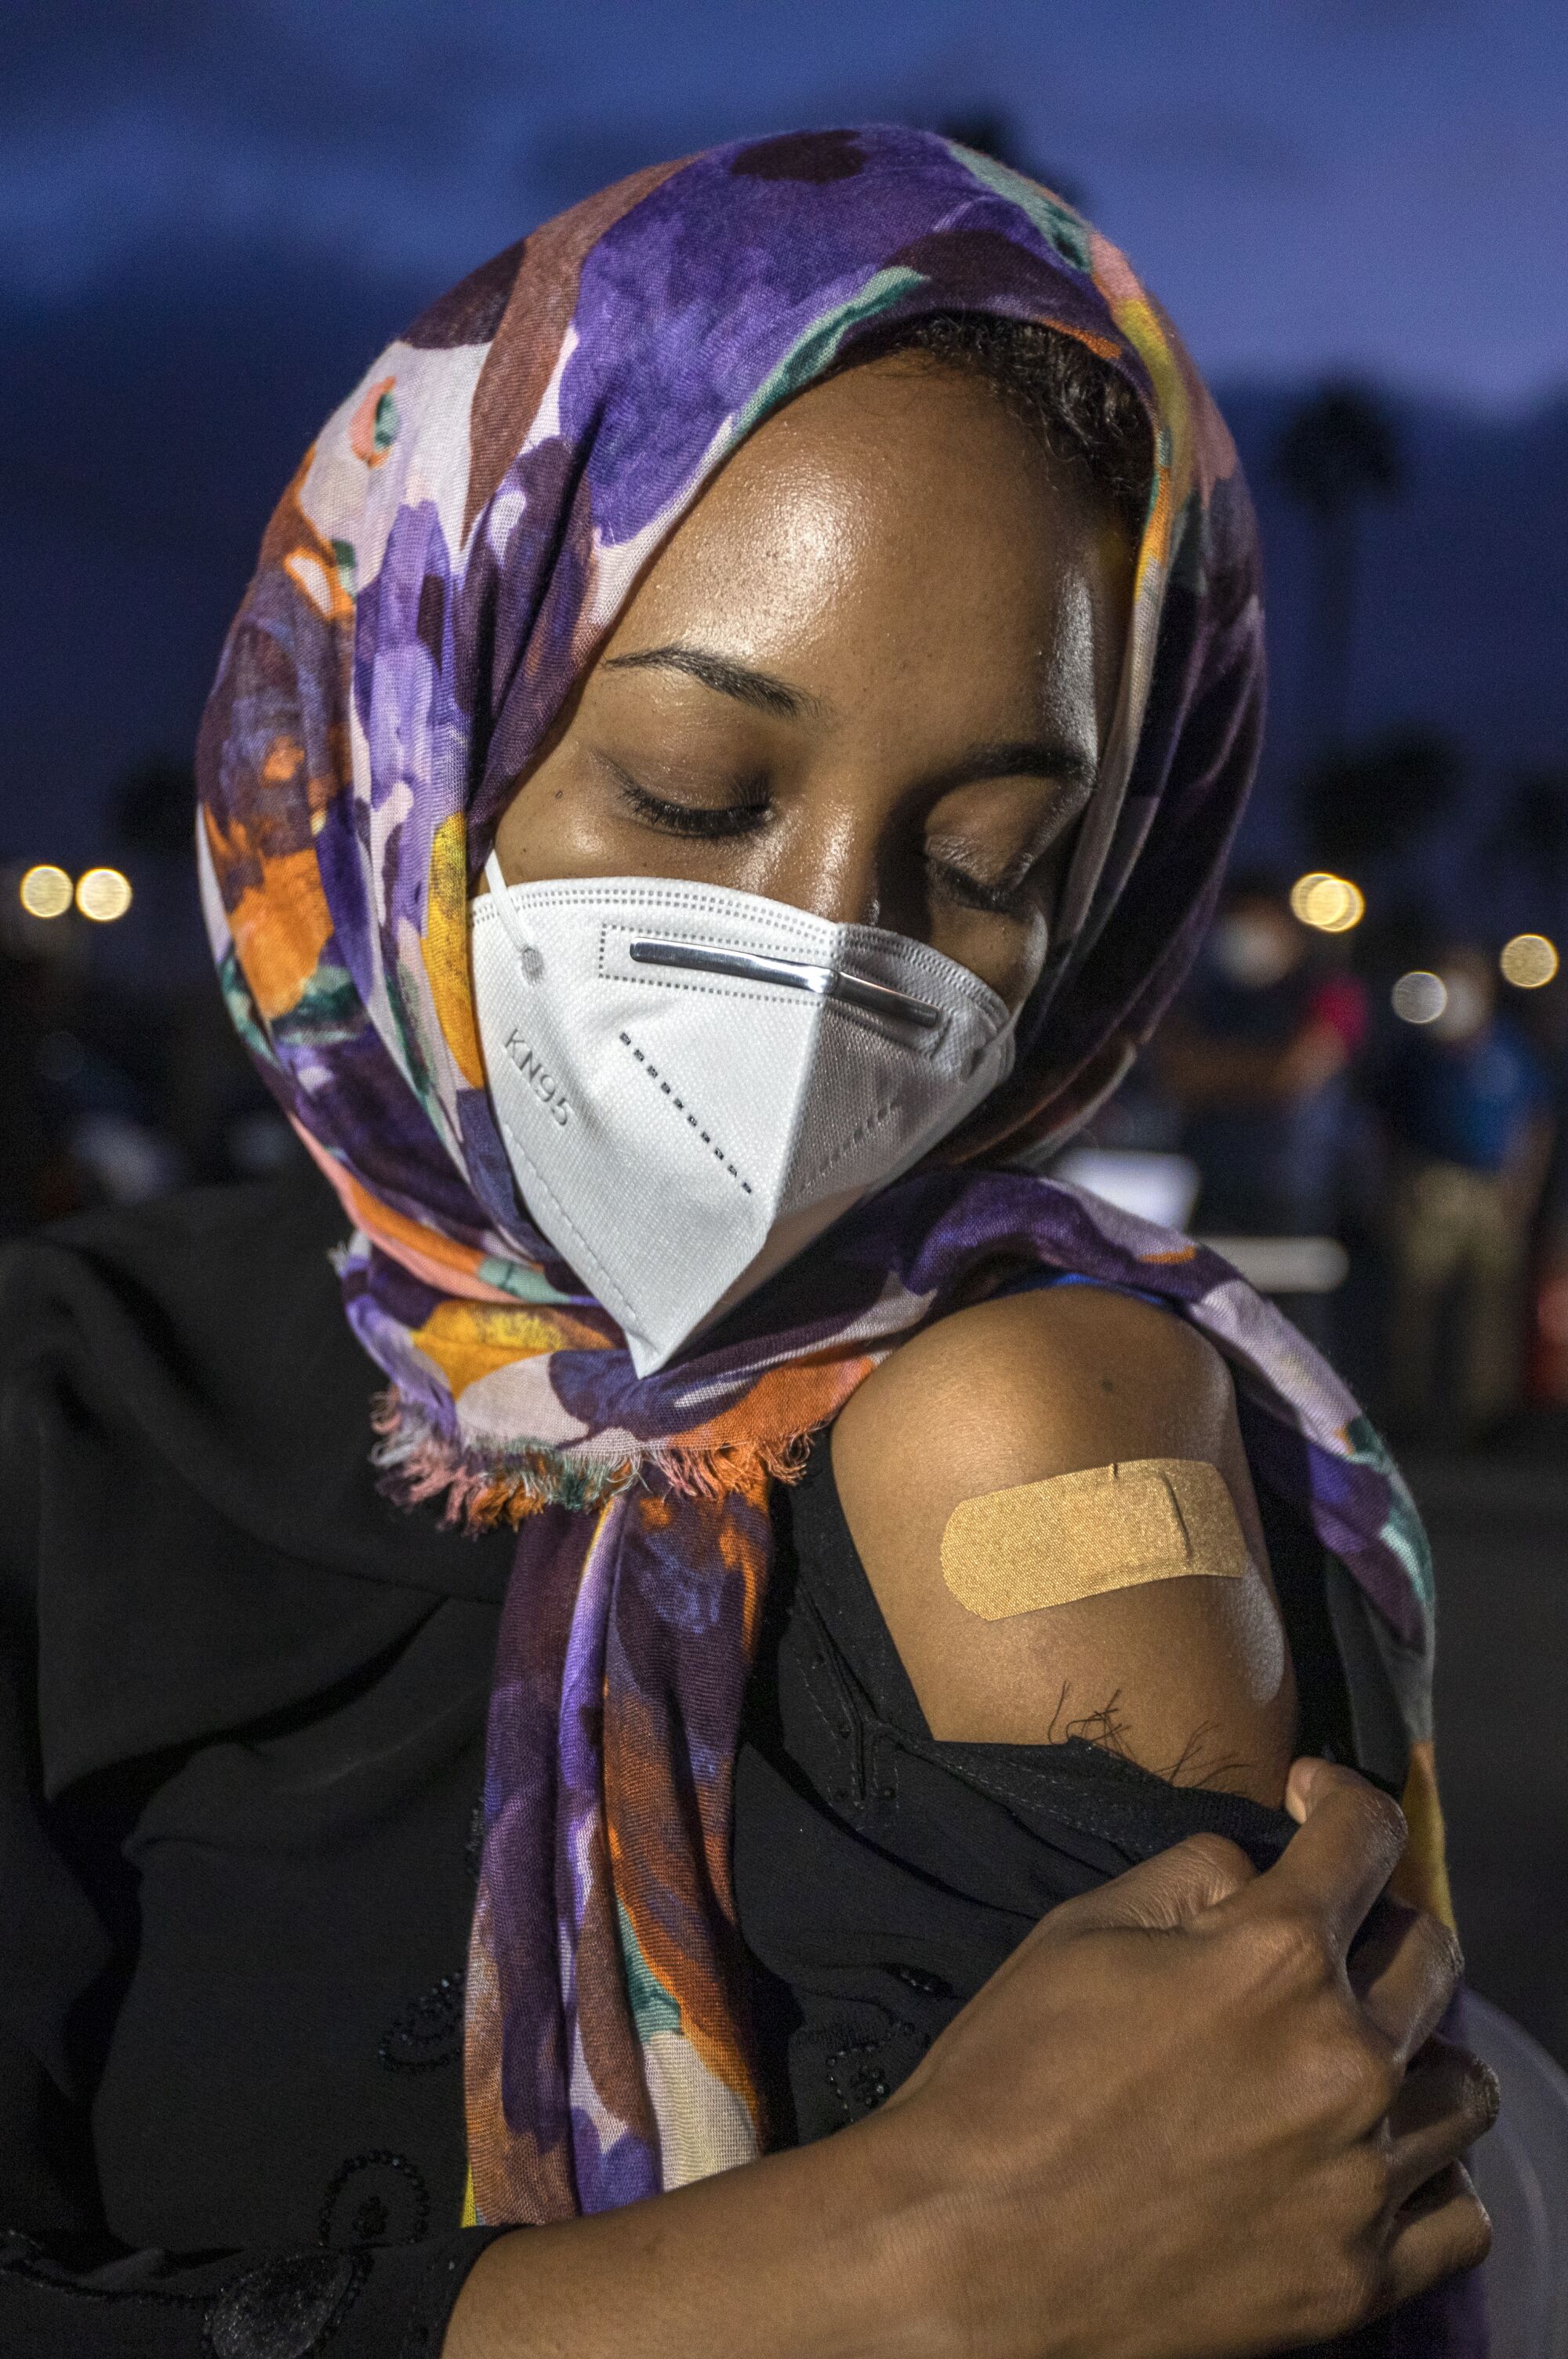 A woman in a headscarf and mask shows a Band-Aid on her upper arm.